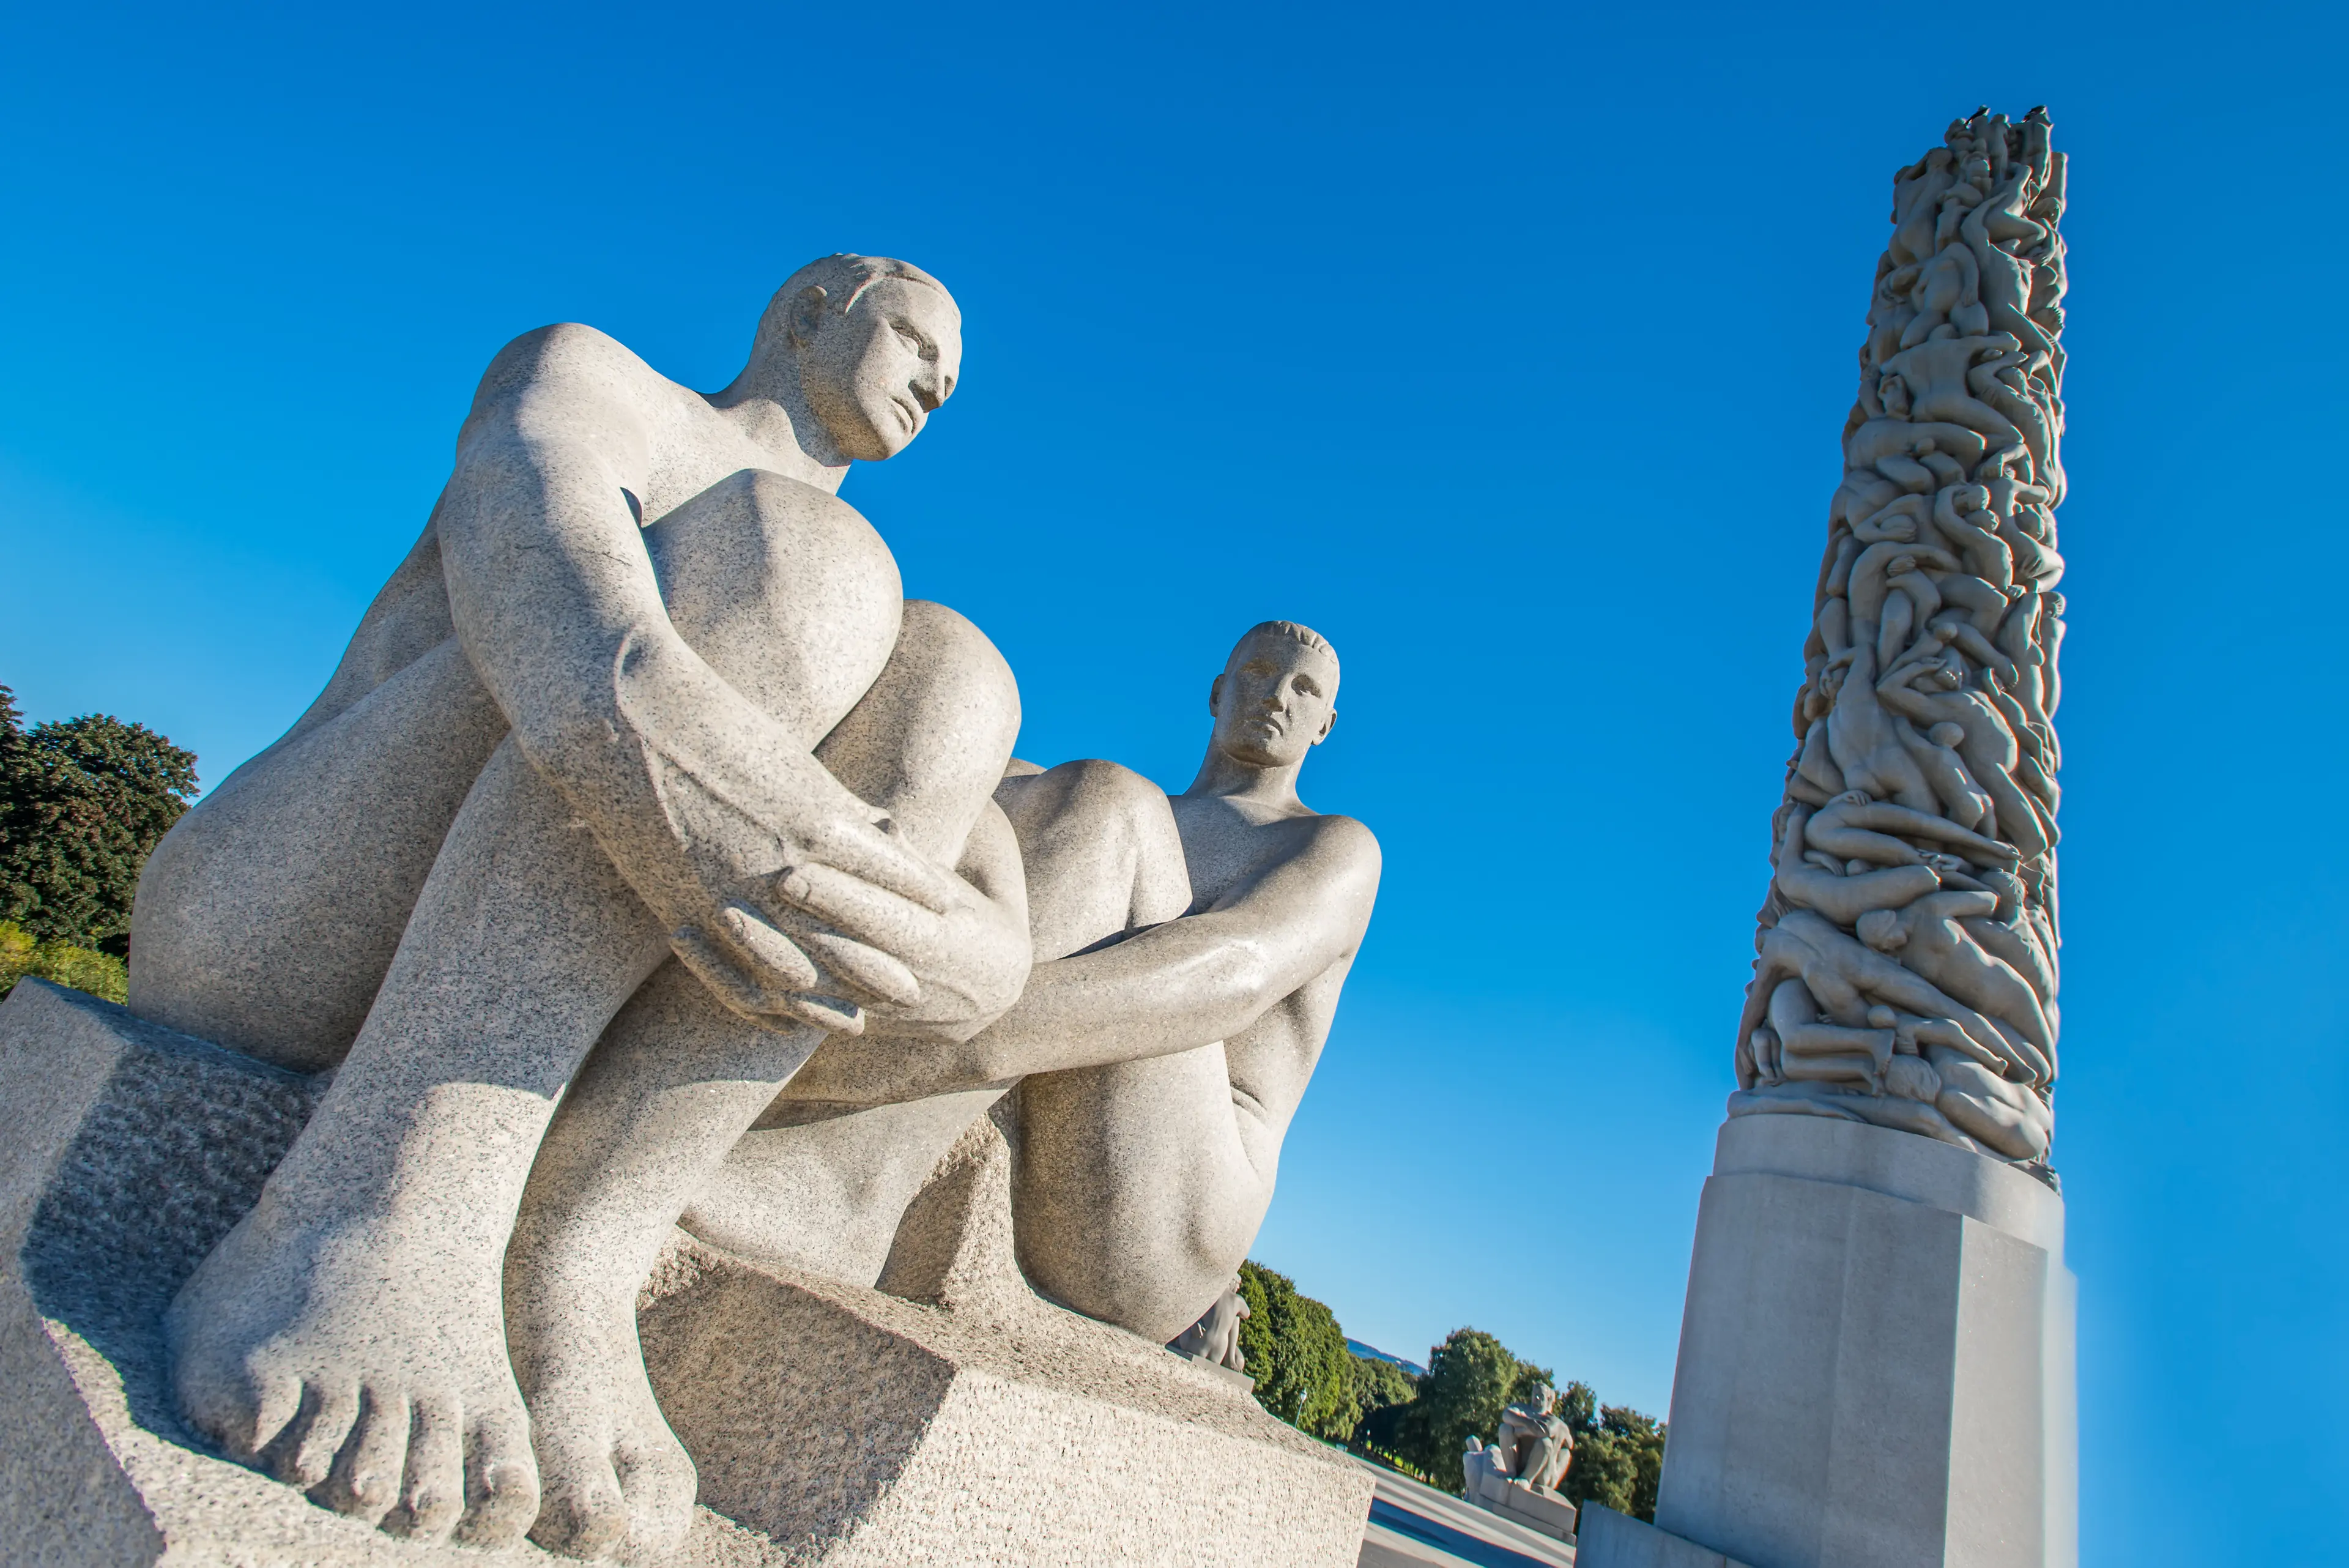 Statues at the Vigeland Park